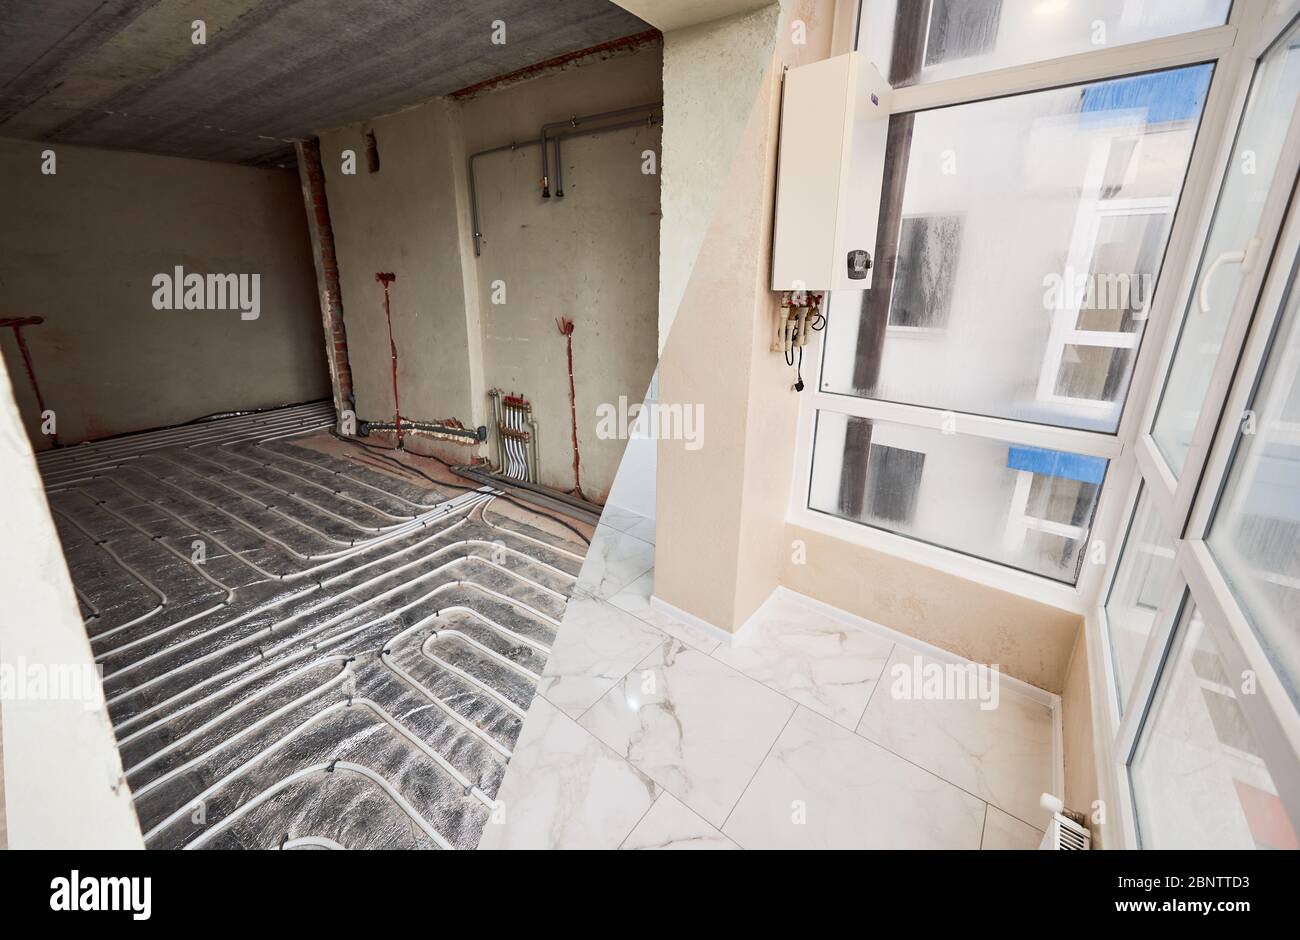 Comparison of new renovated apartment with modern plastic window and marble floor and old place with underfloor heating pipes. Apartment room before and after refurbishment. Concept of home renovation Stock Photo